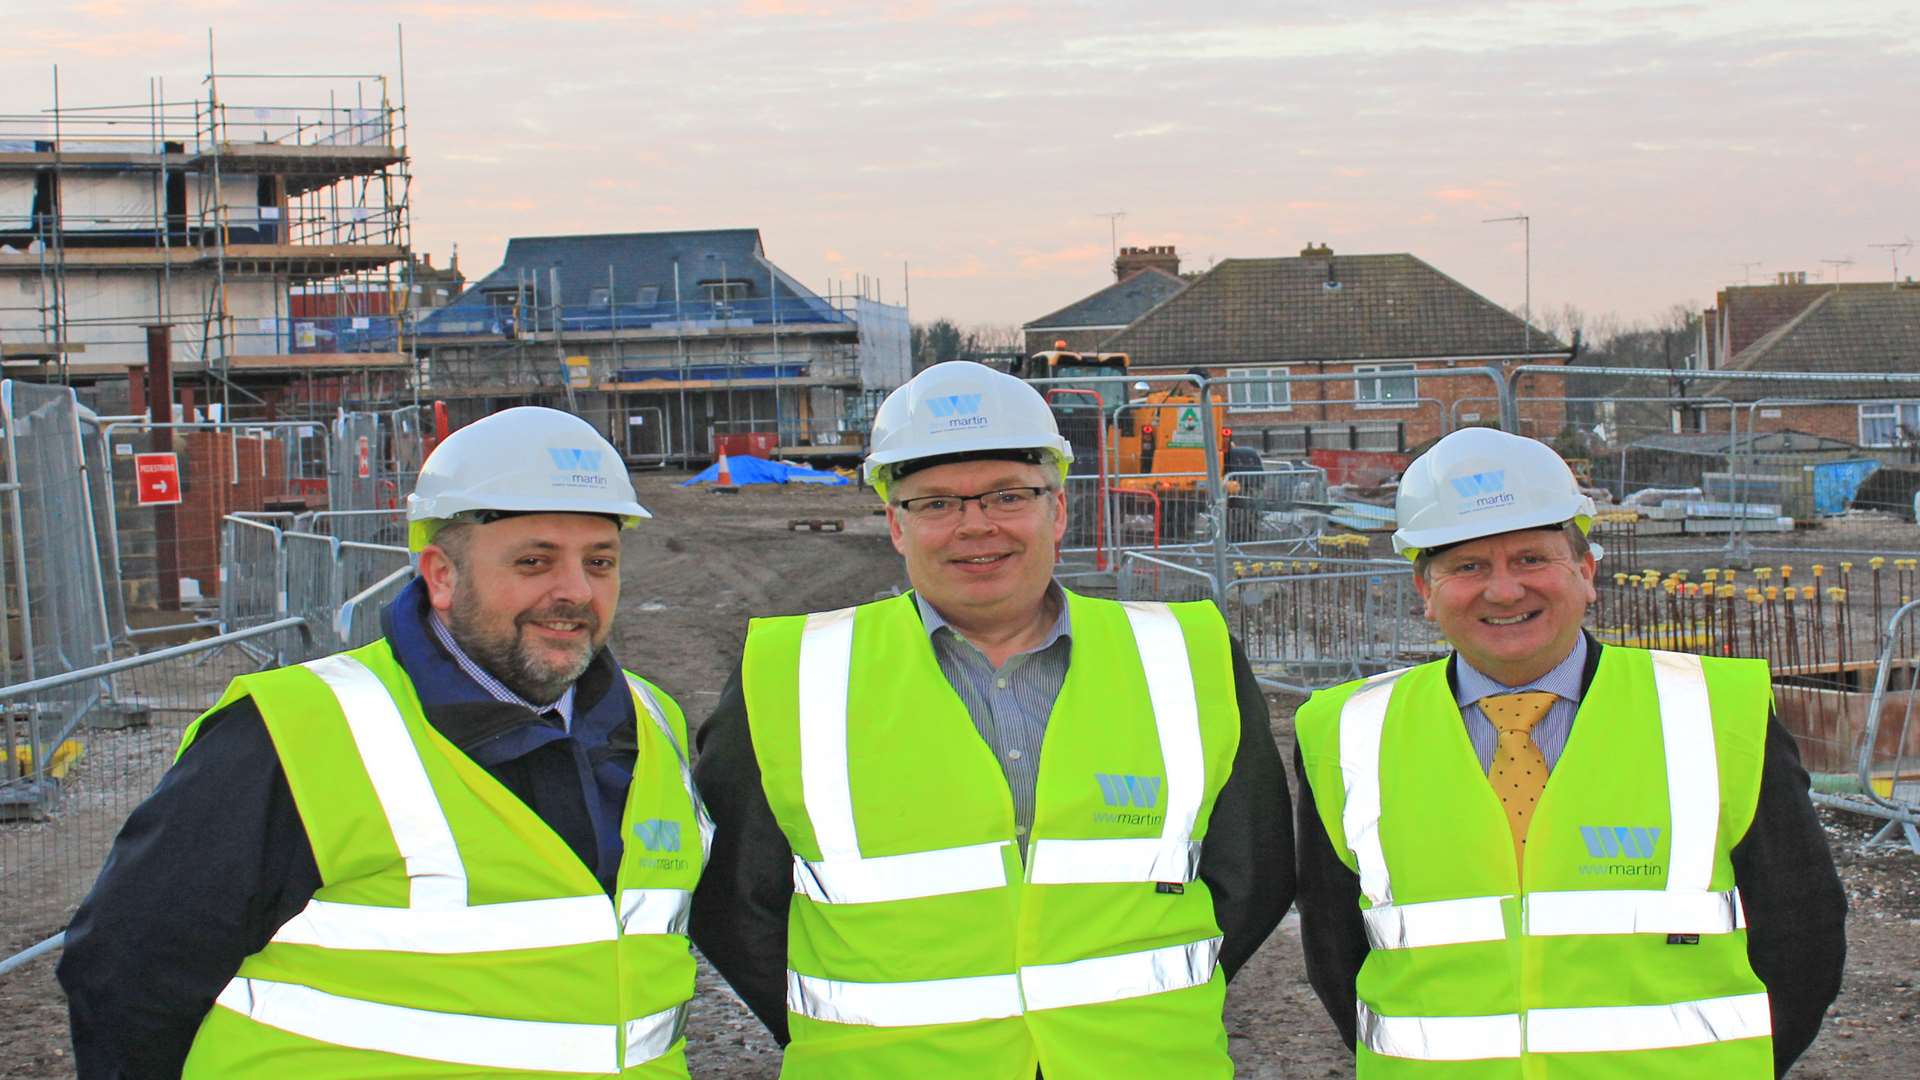 From left, WW Martin directors Neil Peck, Mike Darling and Ian Posnett on the site of the redevelopment of the former Flour Mill in Ramsgate, which will be turned into 72 homes